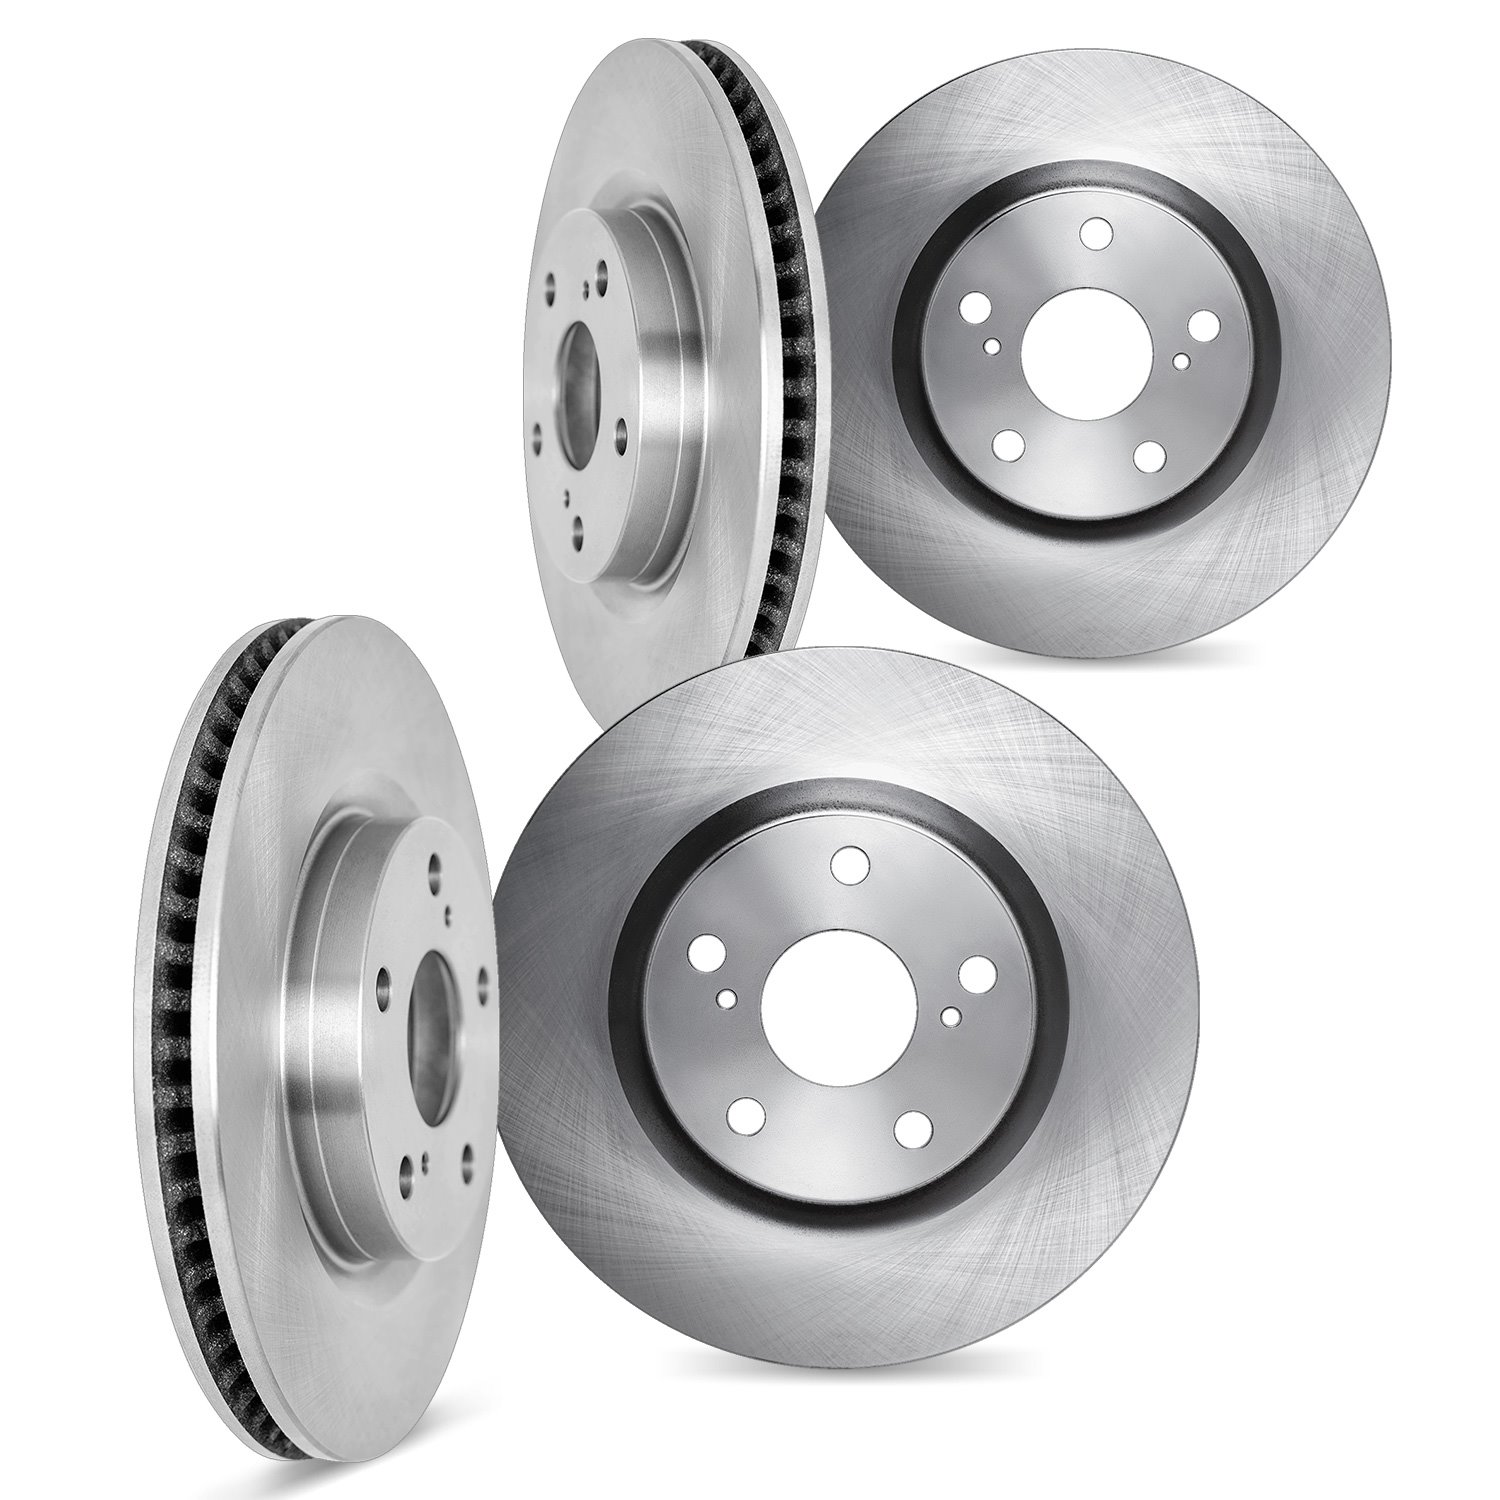 6004-46025 Brake Rotors, Fits Select GM, Position: Front and Rear